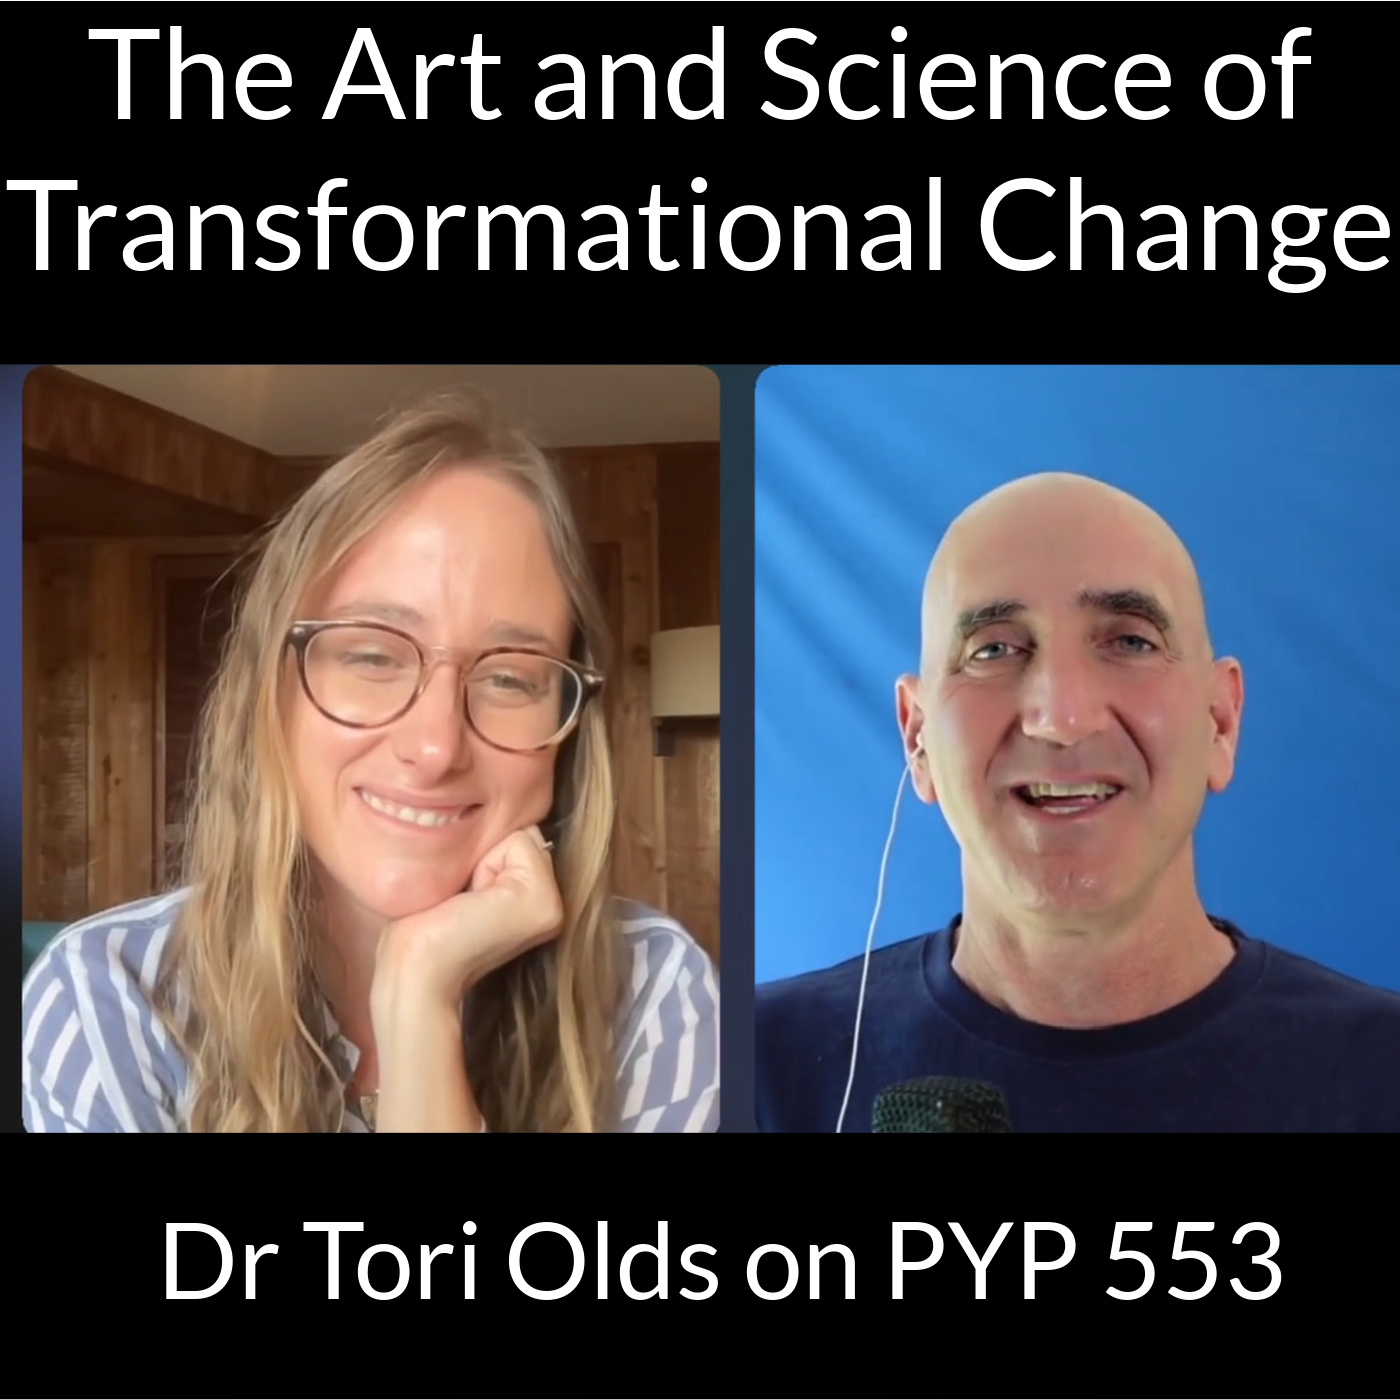 The Art and Neuroscience of Transformational Change: Dr Tori Olds on PYP 553